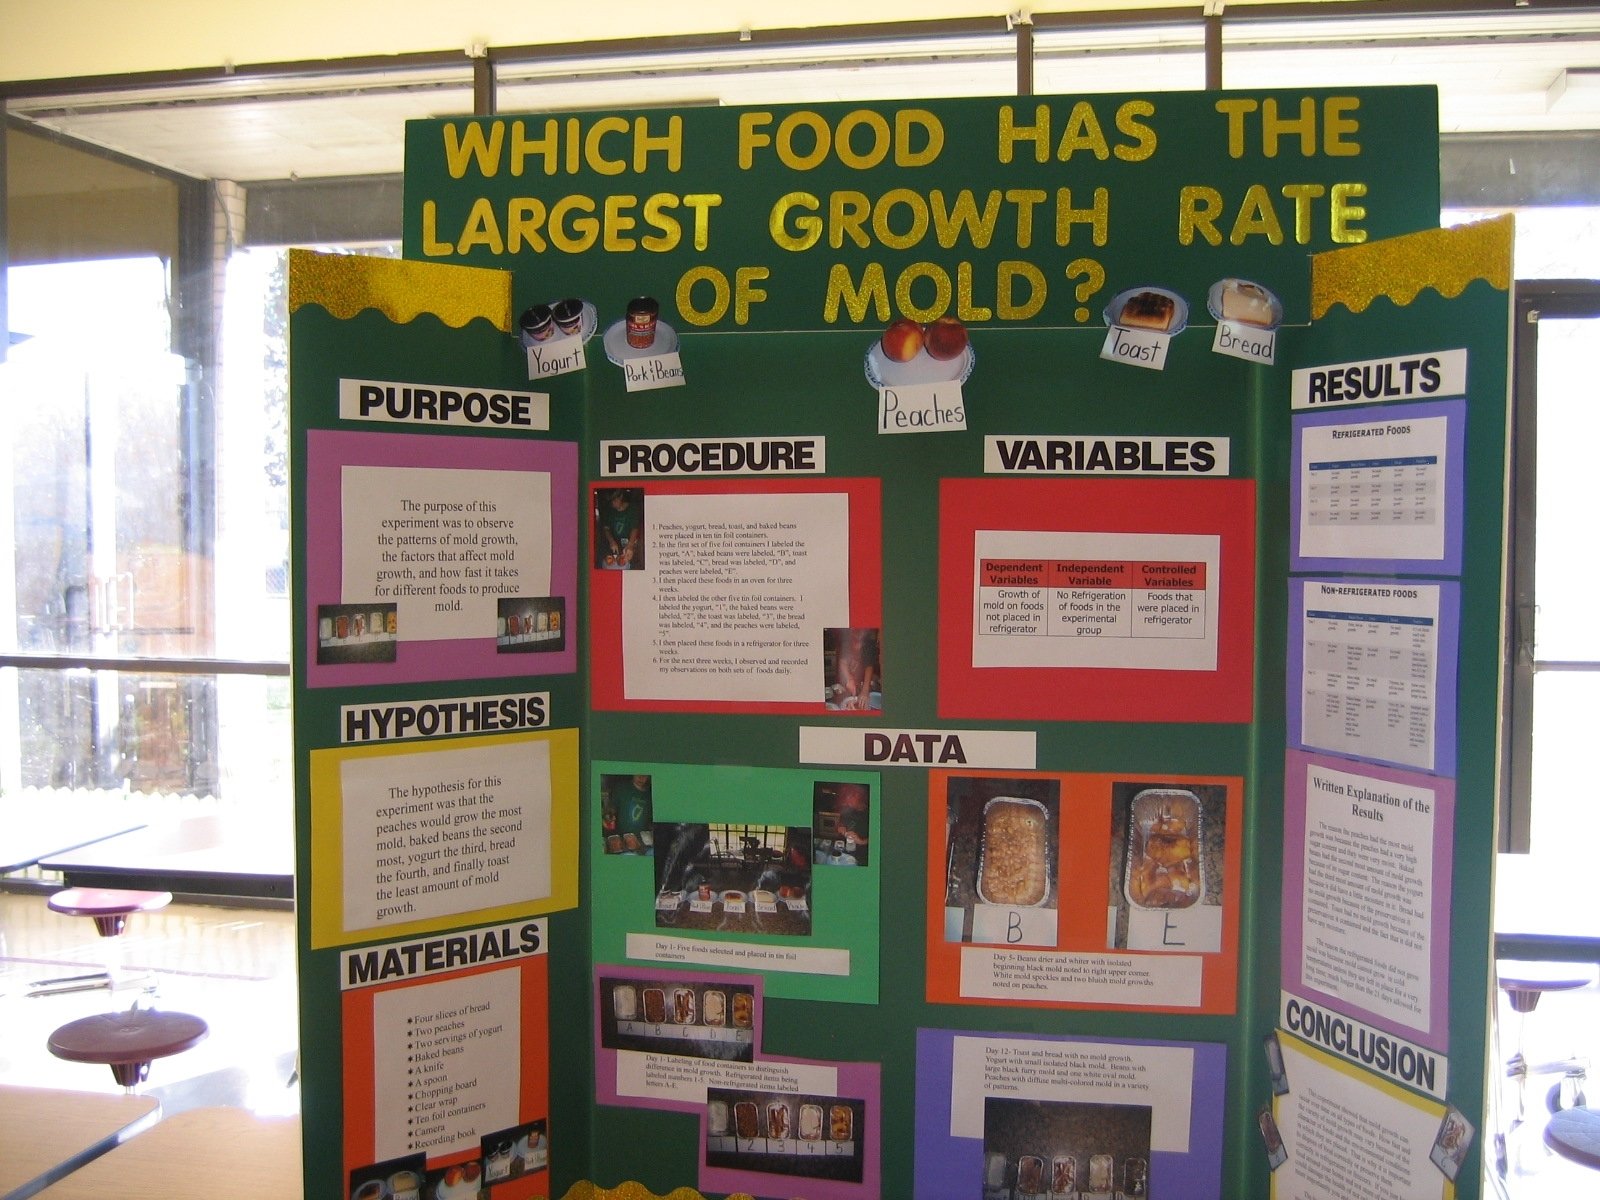 10 Unique Food Science Fair Project Ideas best photos of bread mold science project hypothesis bread mold 2022